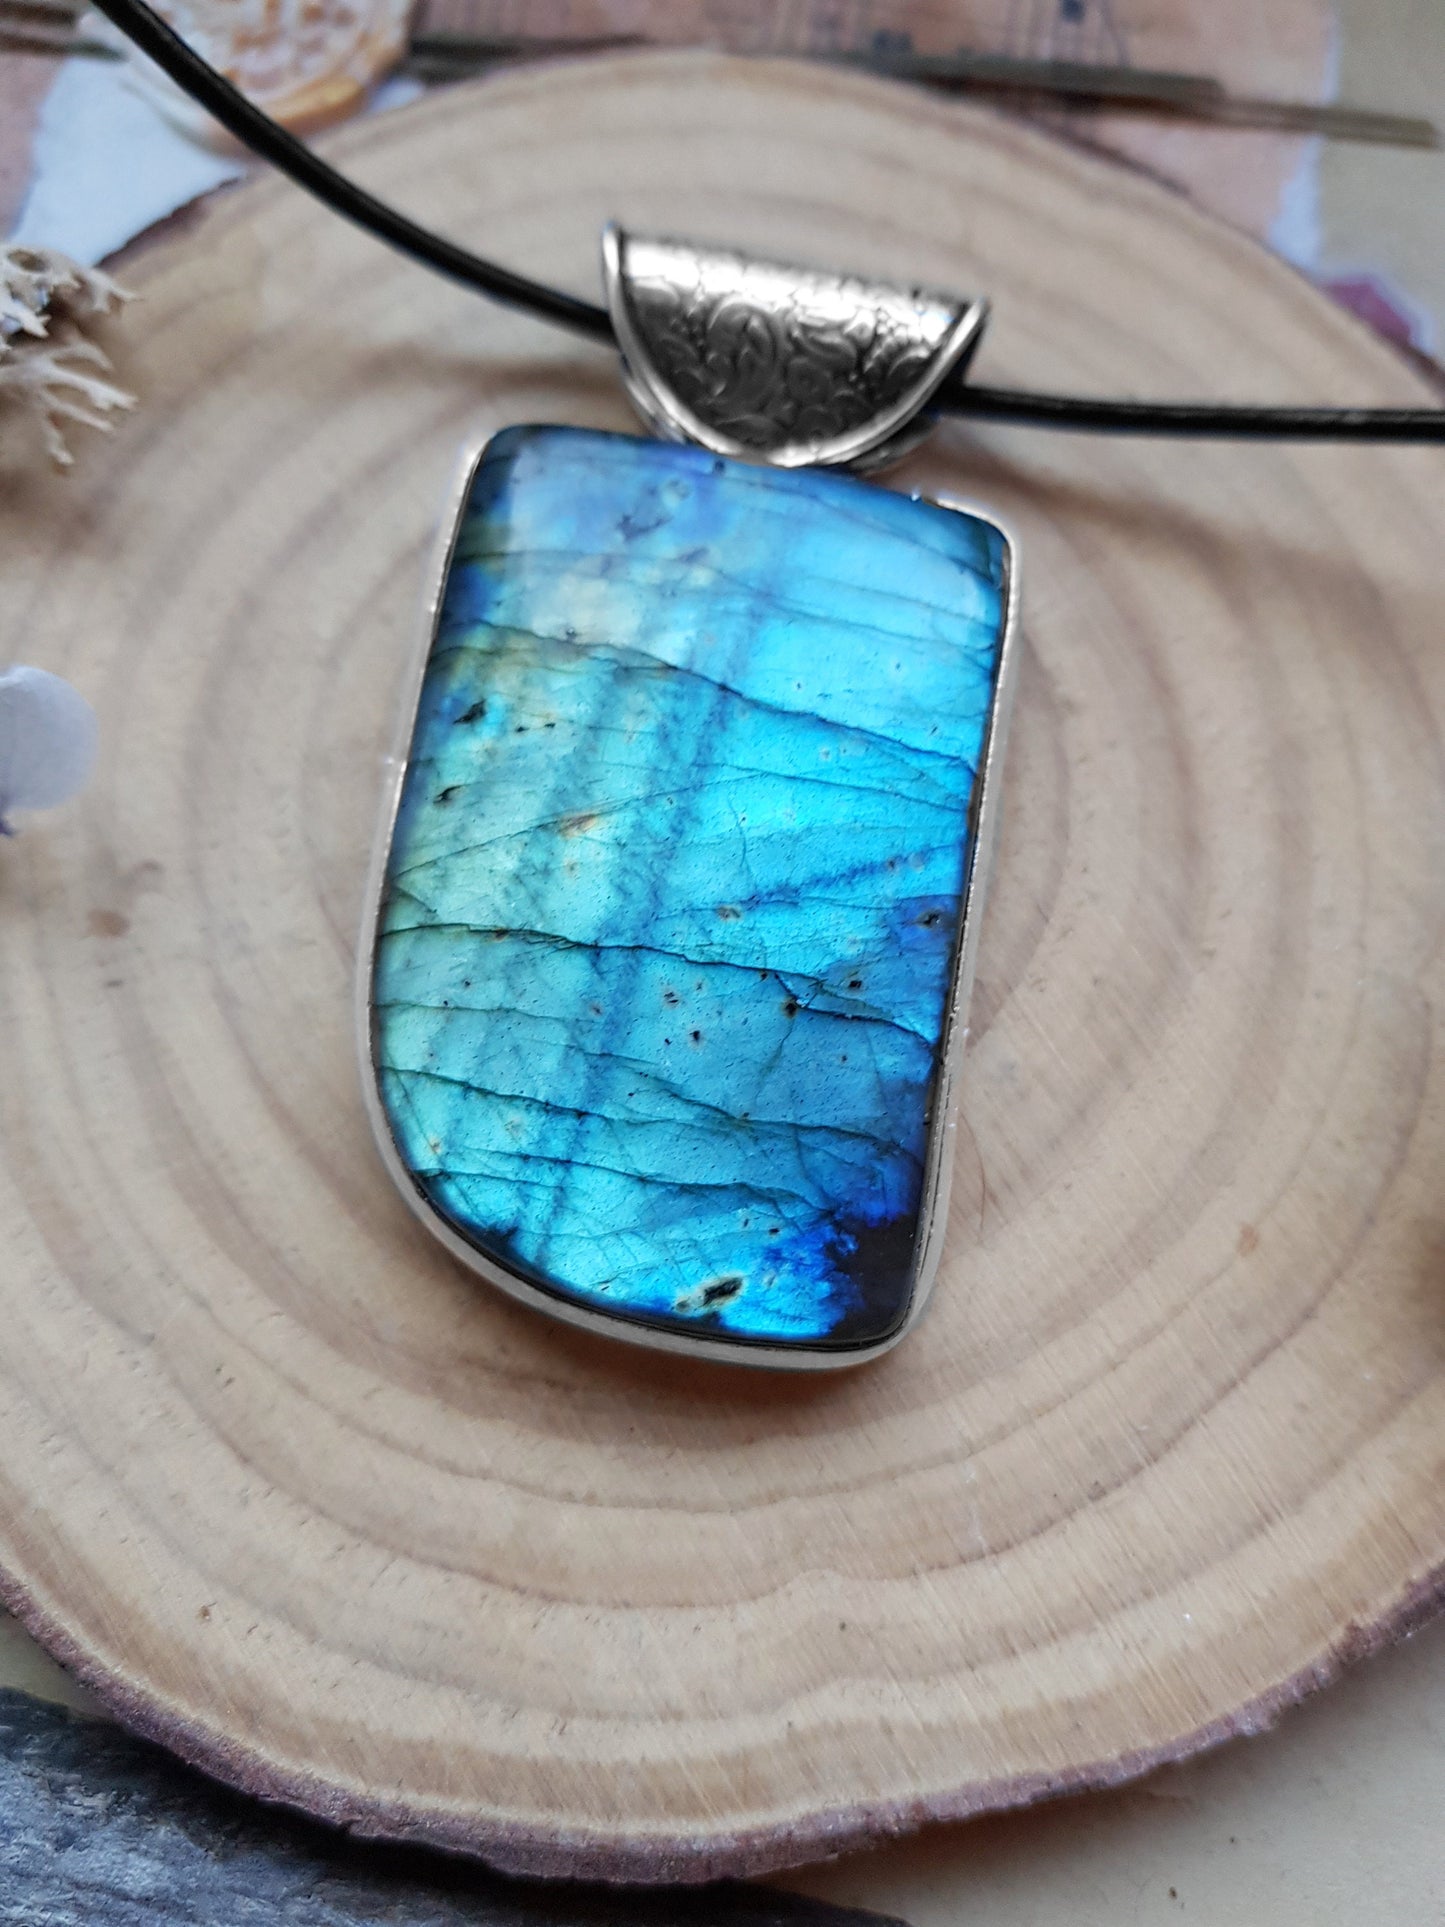 Top Quality Natural Labradorite Pendant In Sterling Silver Statement Pendant